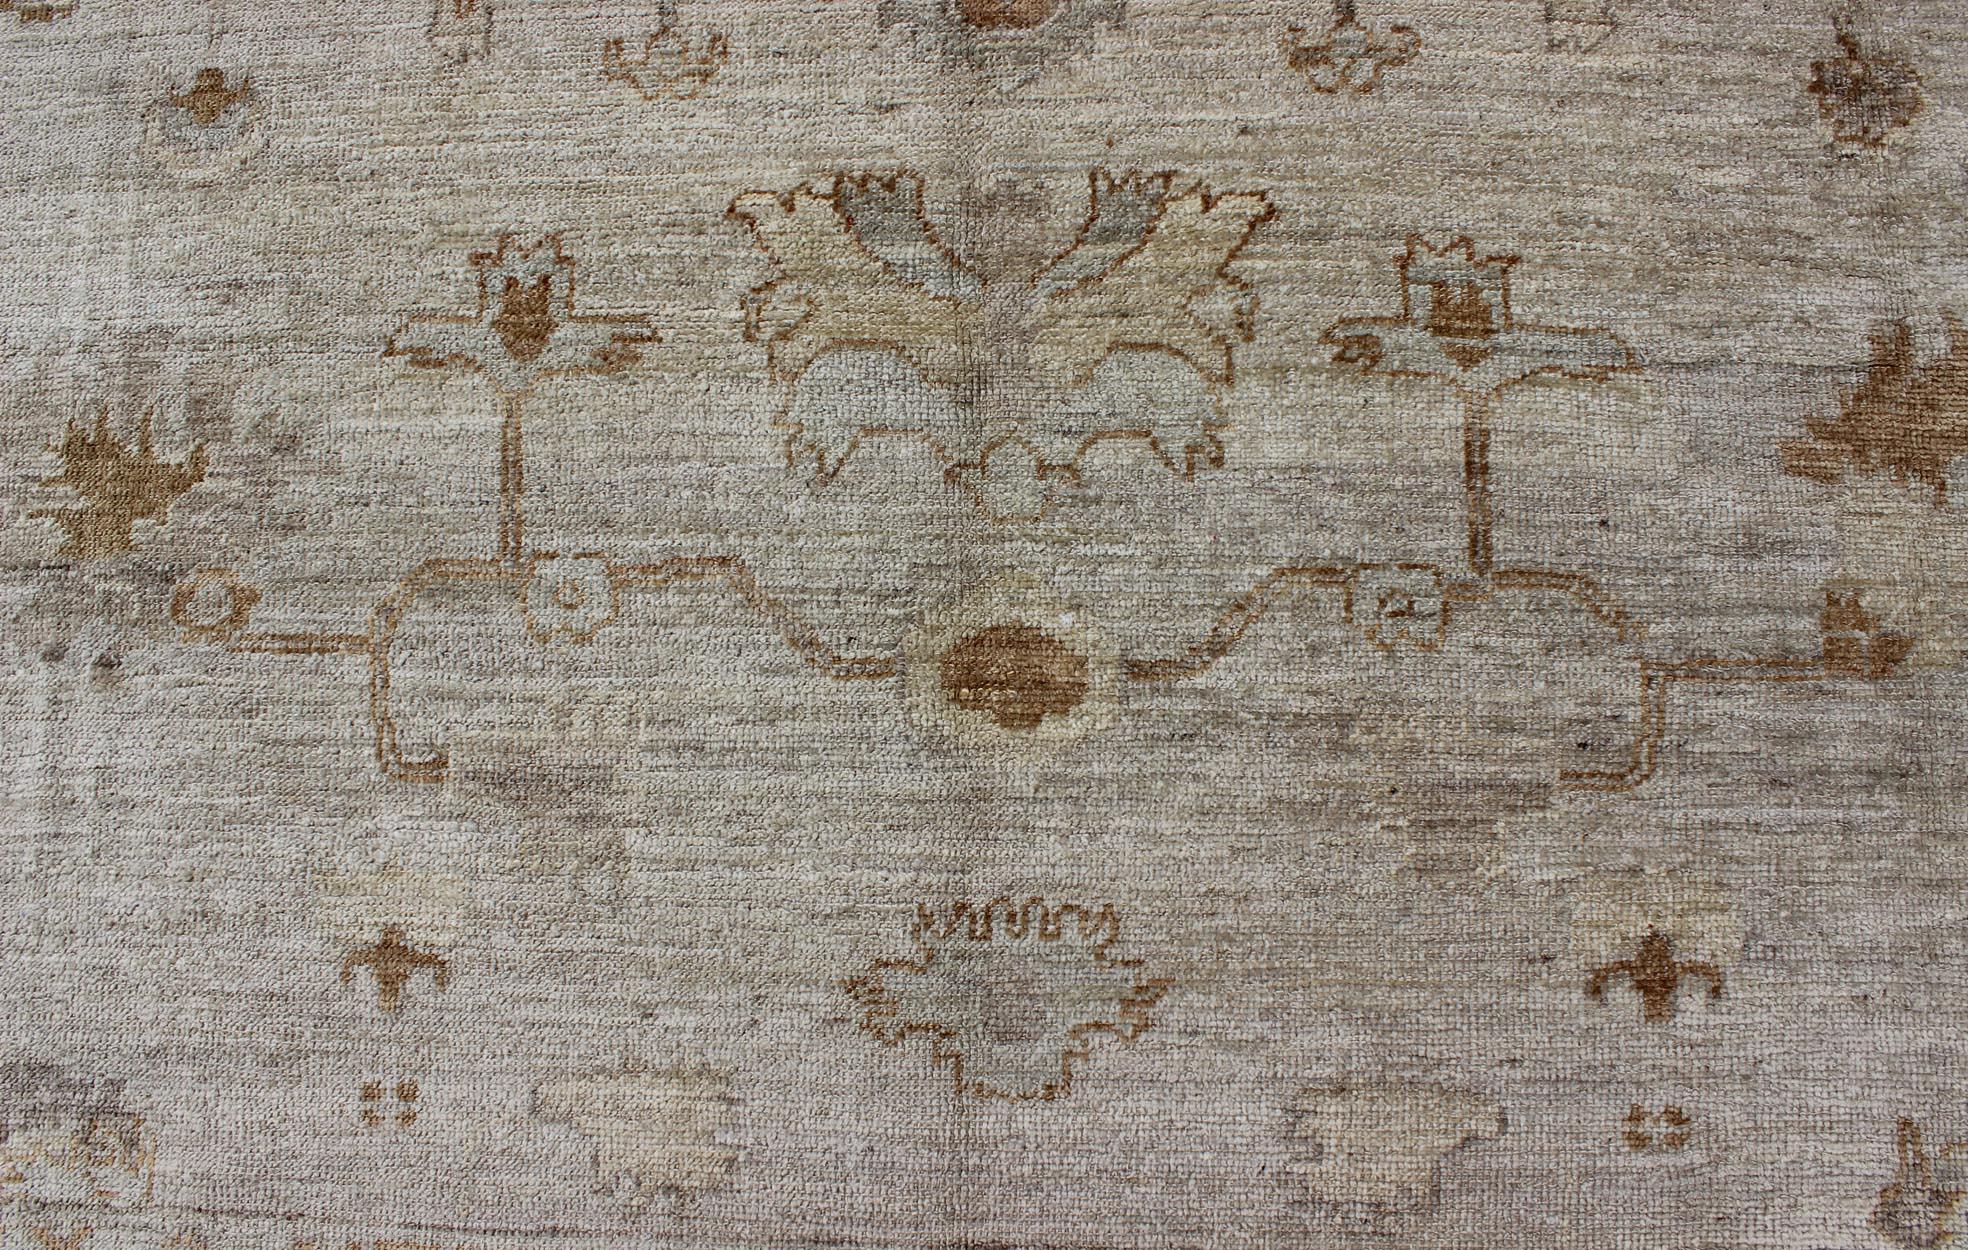 Wool Amazing Angora Turkish Classic Oushak Rug with Floral Motifs in Neutral Tones For Sale